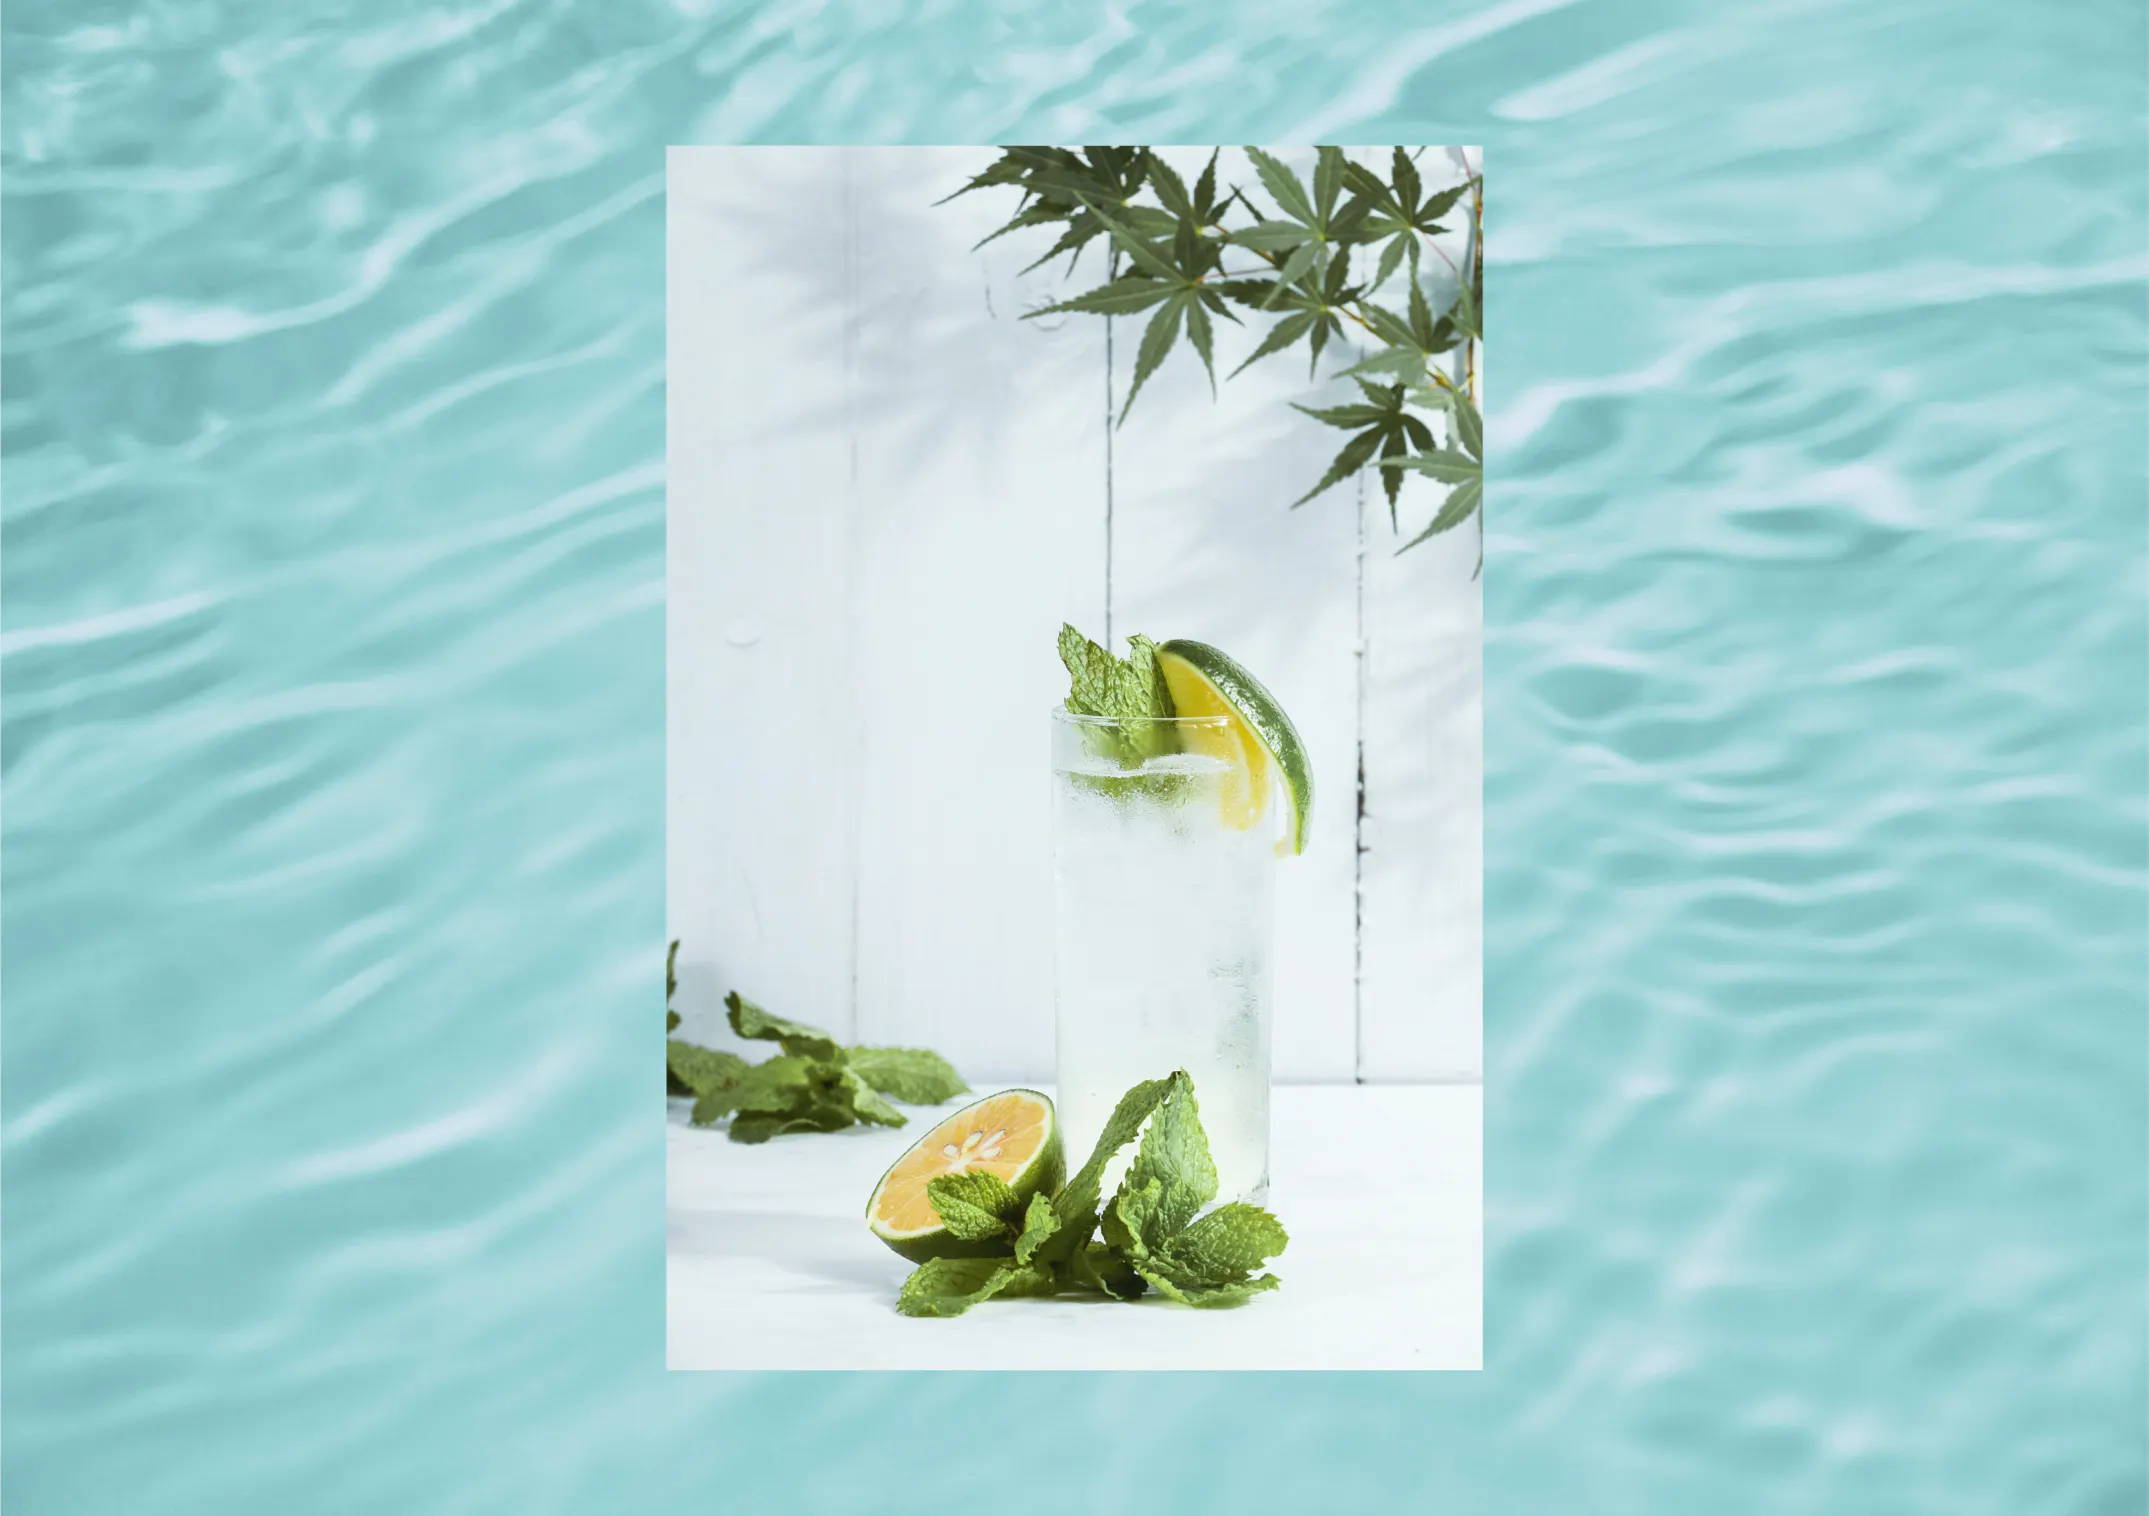 an iced tea mojito with fresh lime and mint garnish placed in front of a blue water background 